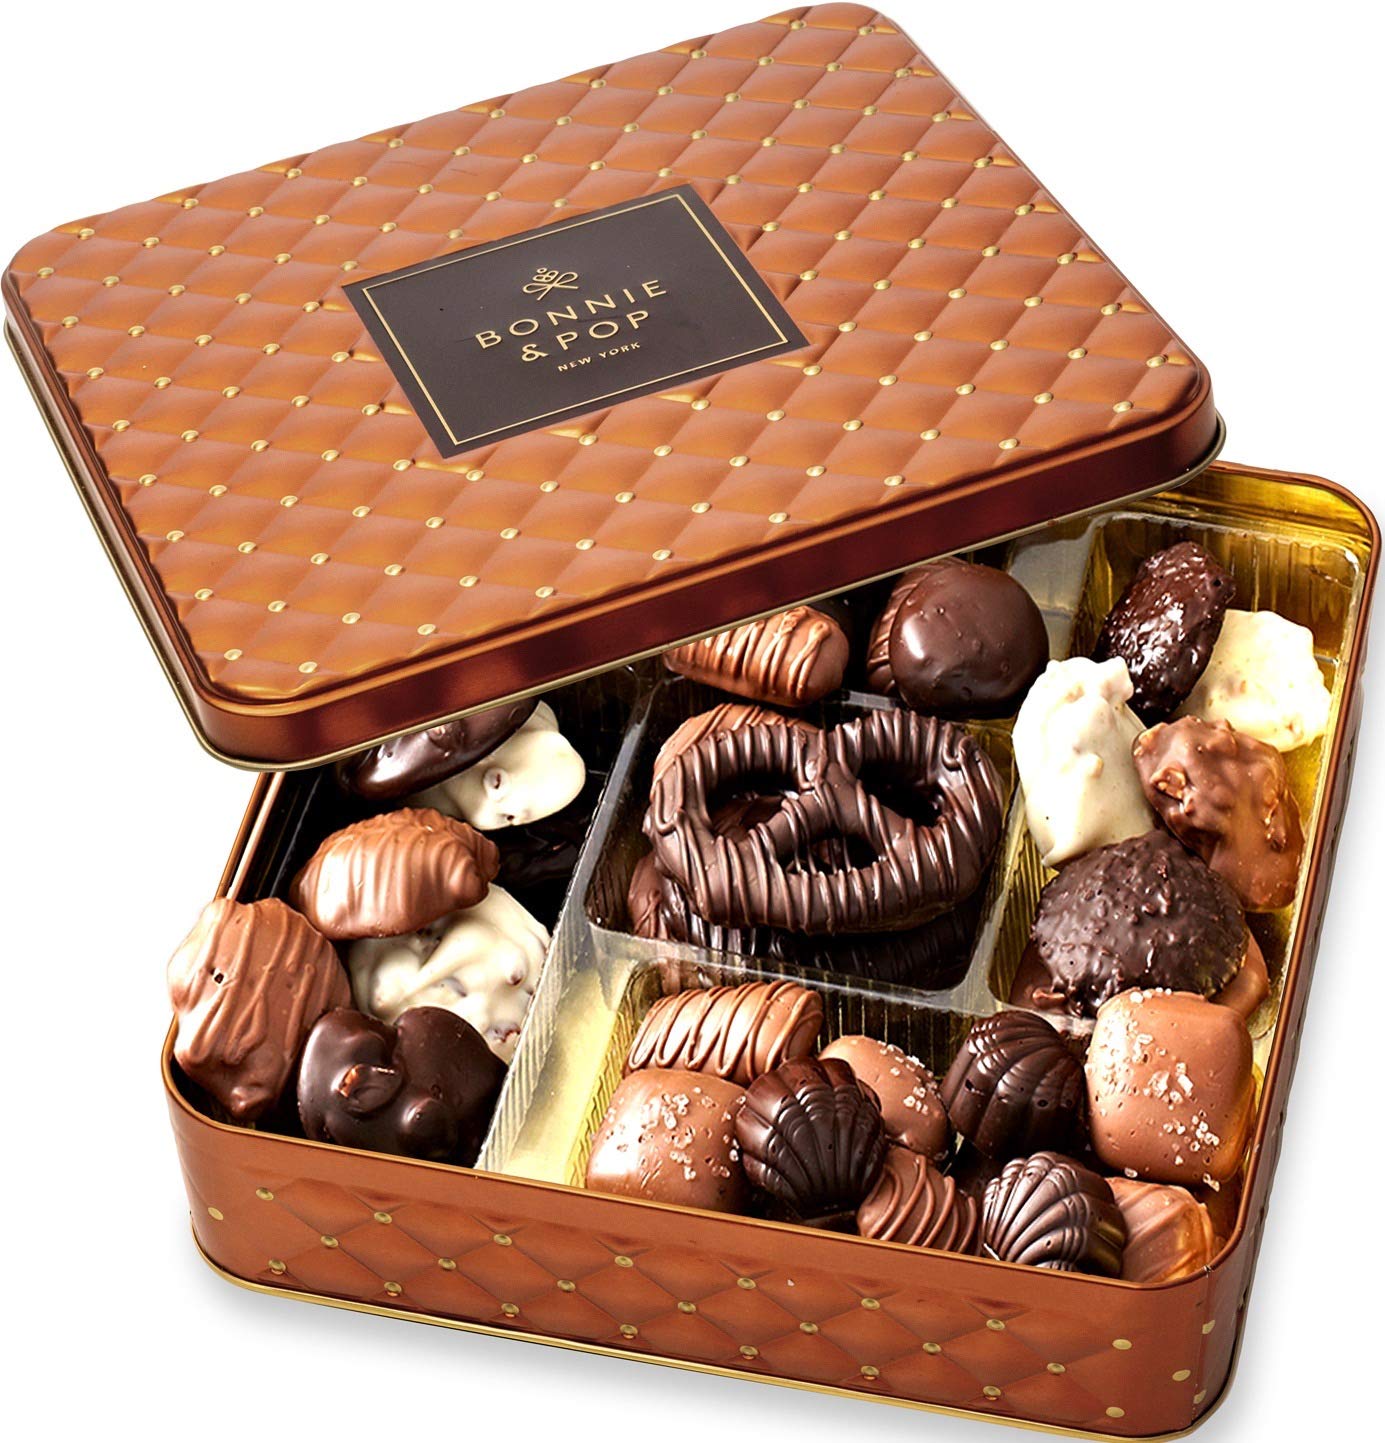 Grand Belgian Chocolate Covered Fruit Gift Box | Chocolate Covered Company